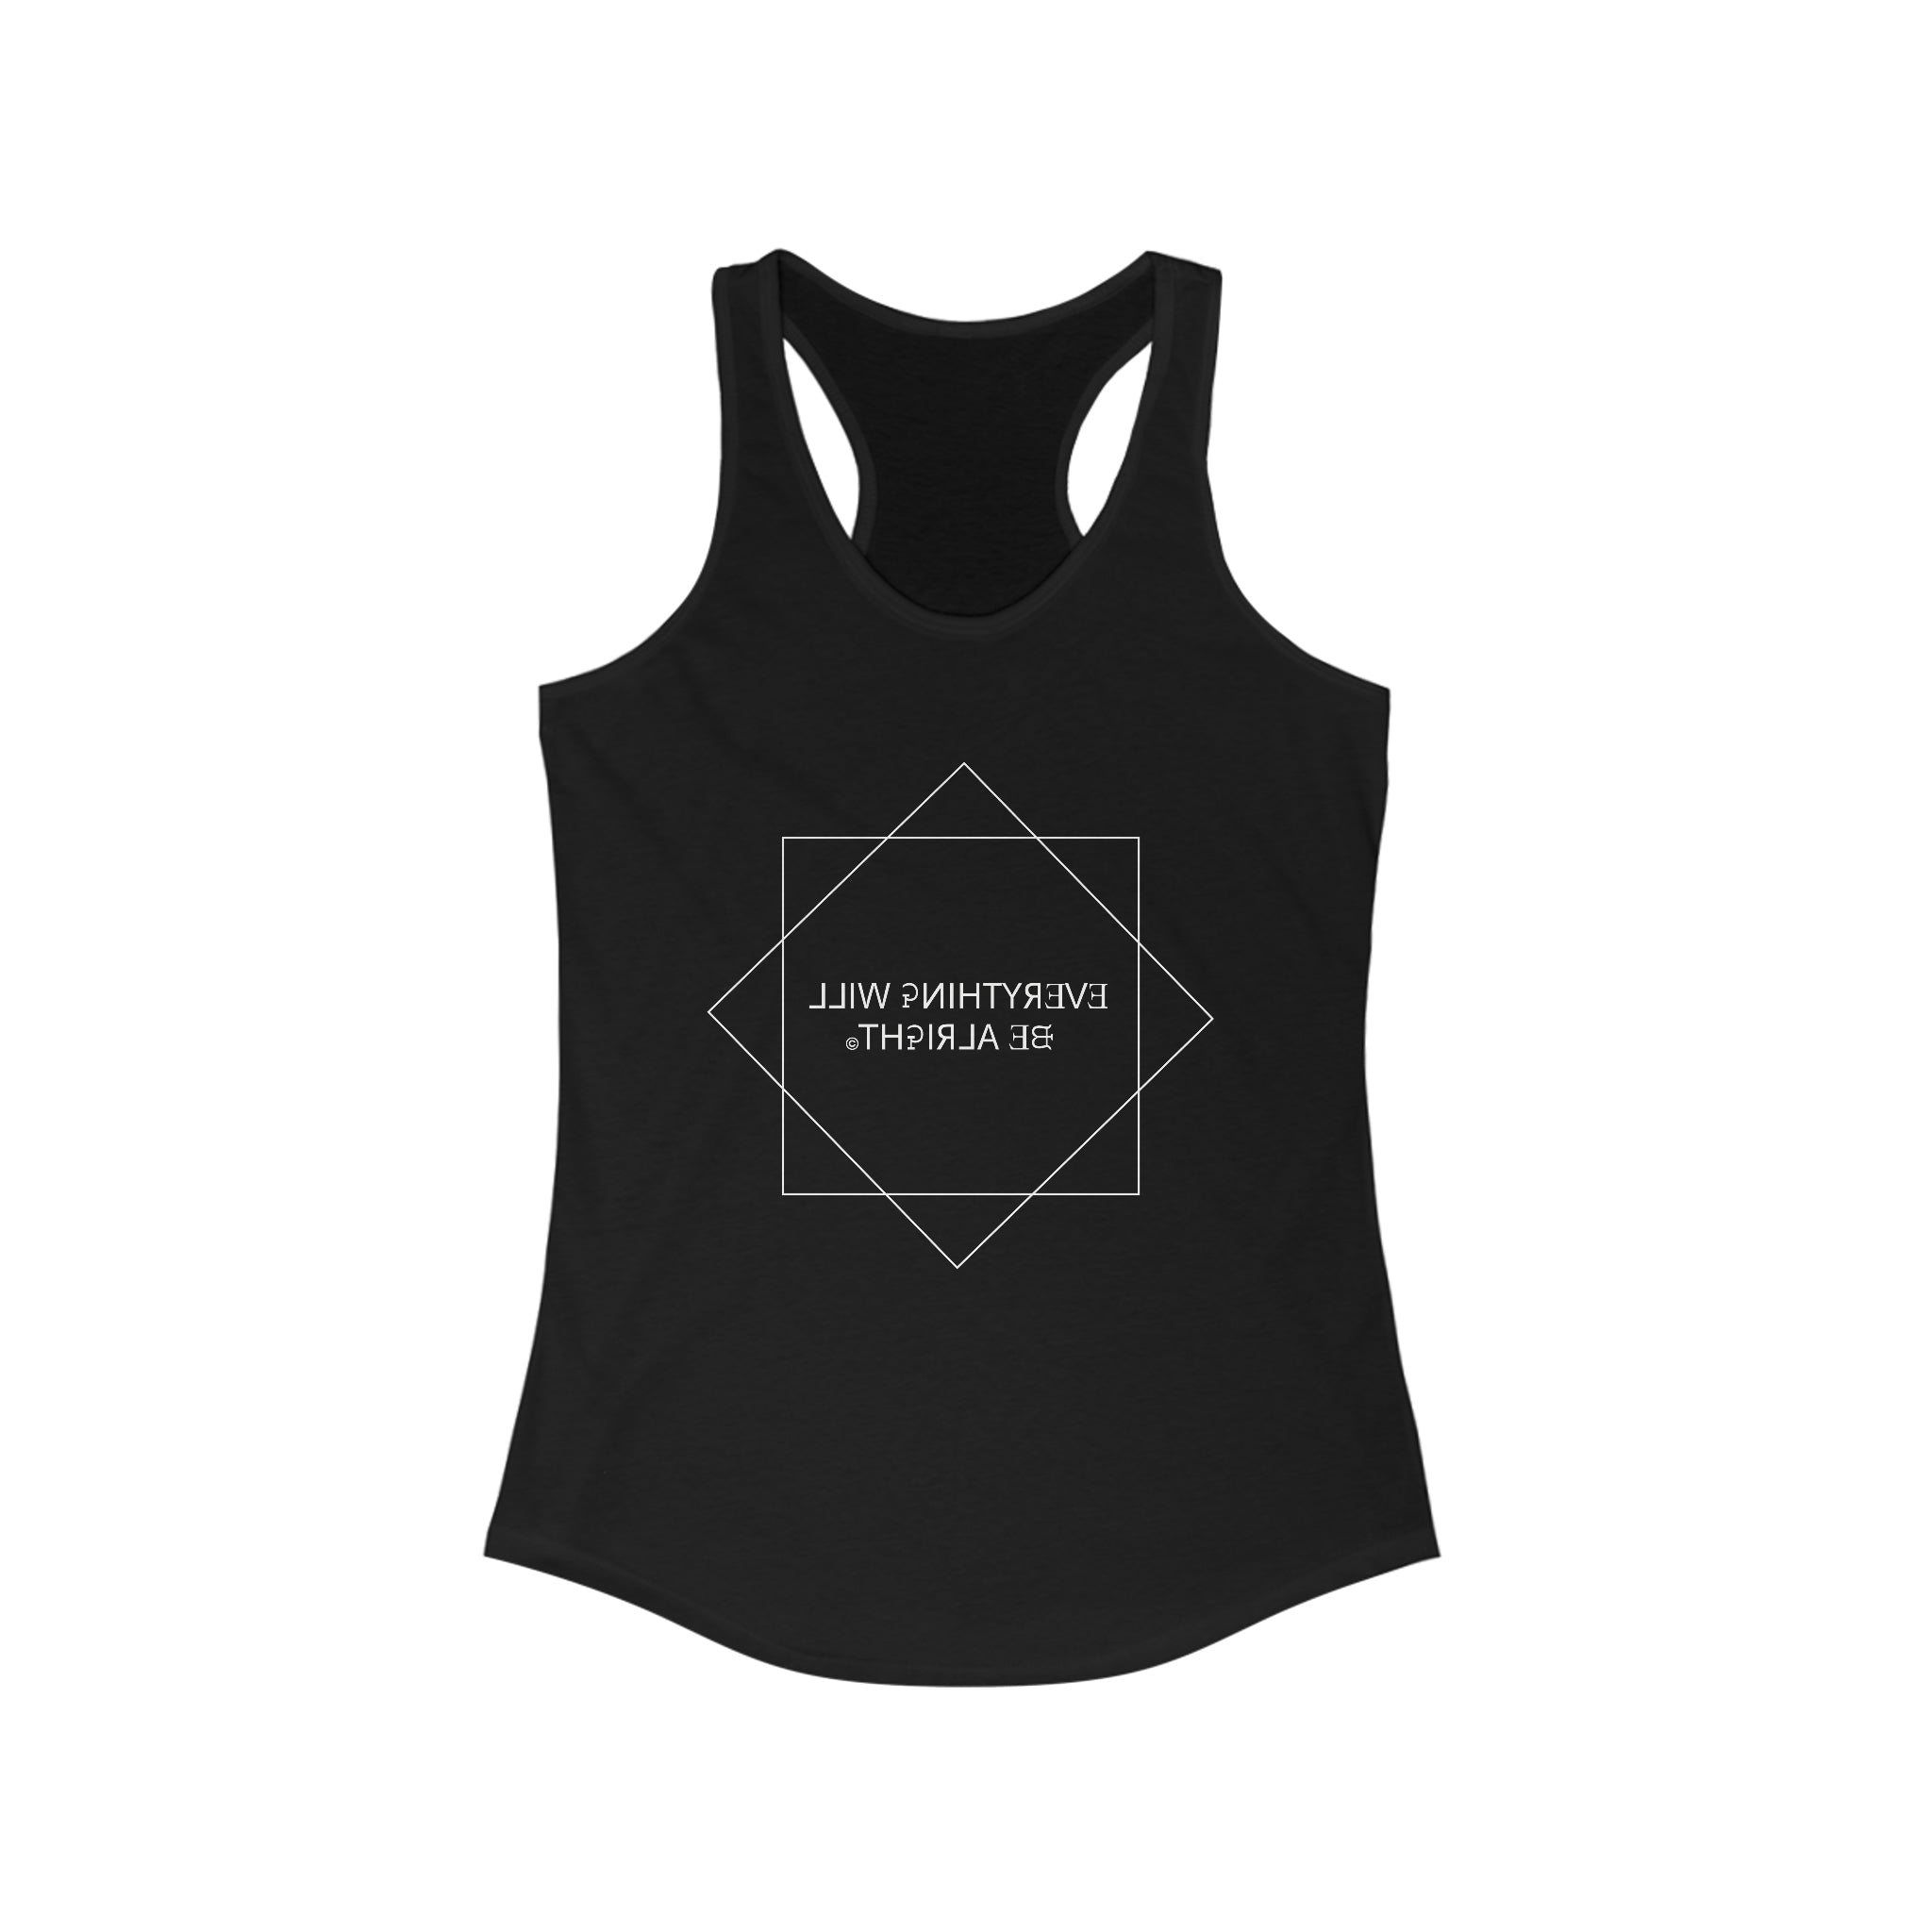 "Everything Will be Alright" Women's Tank